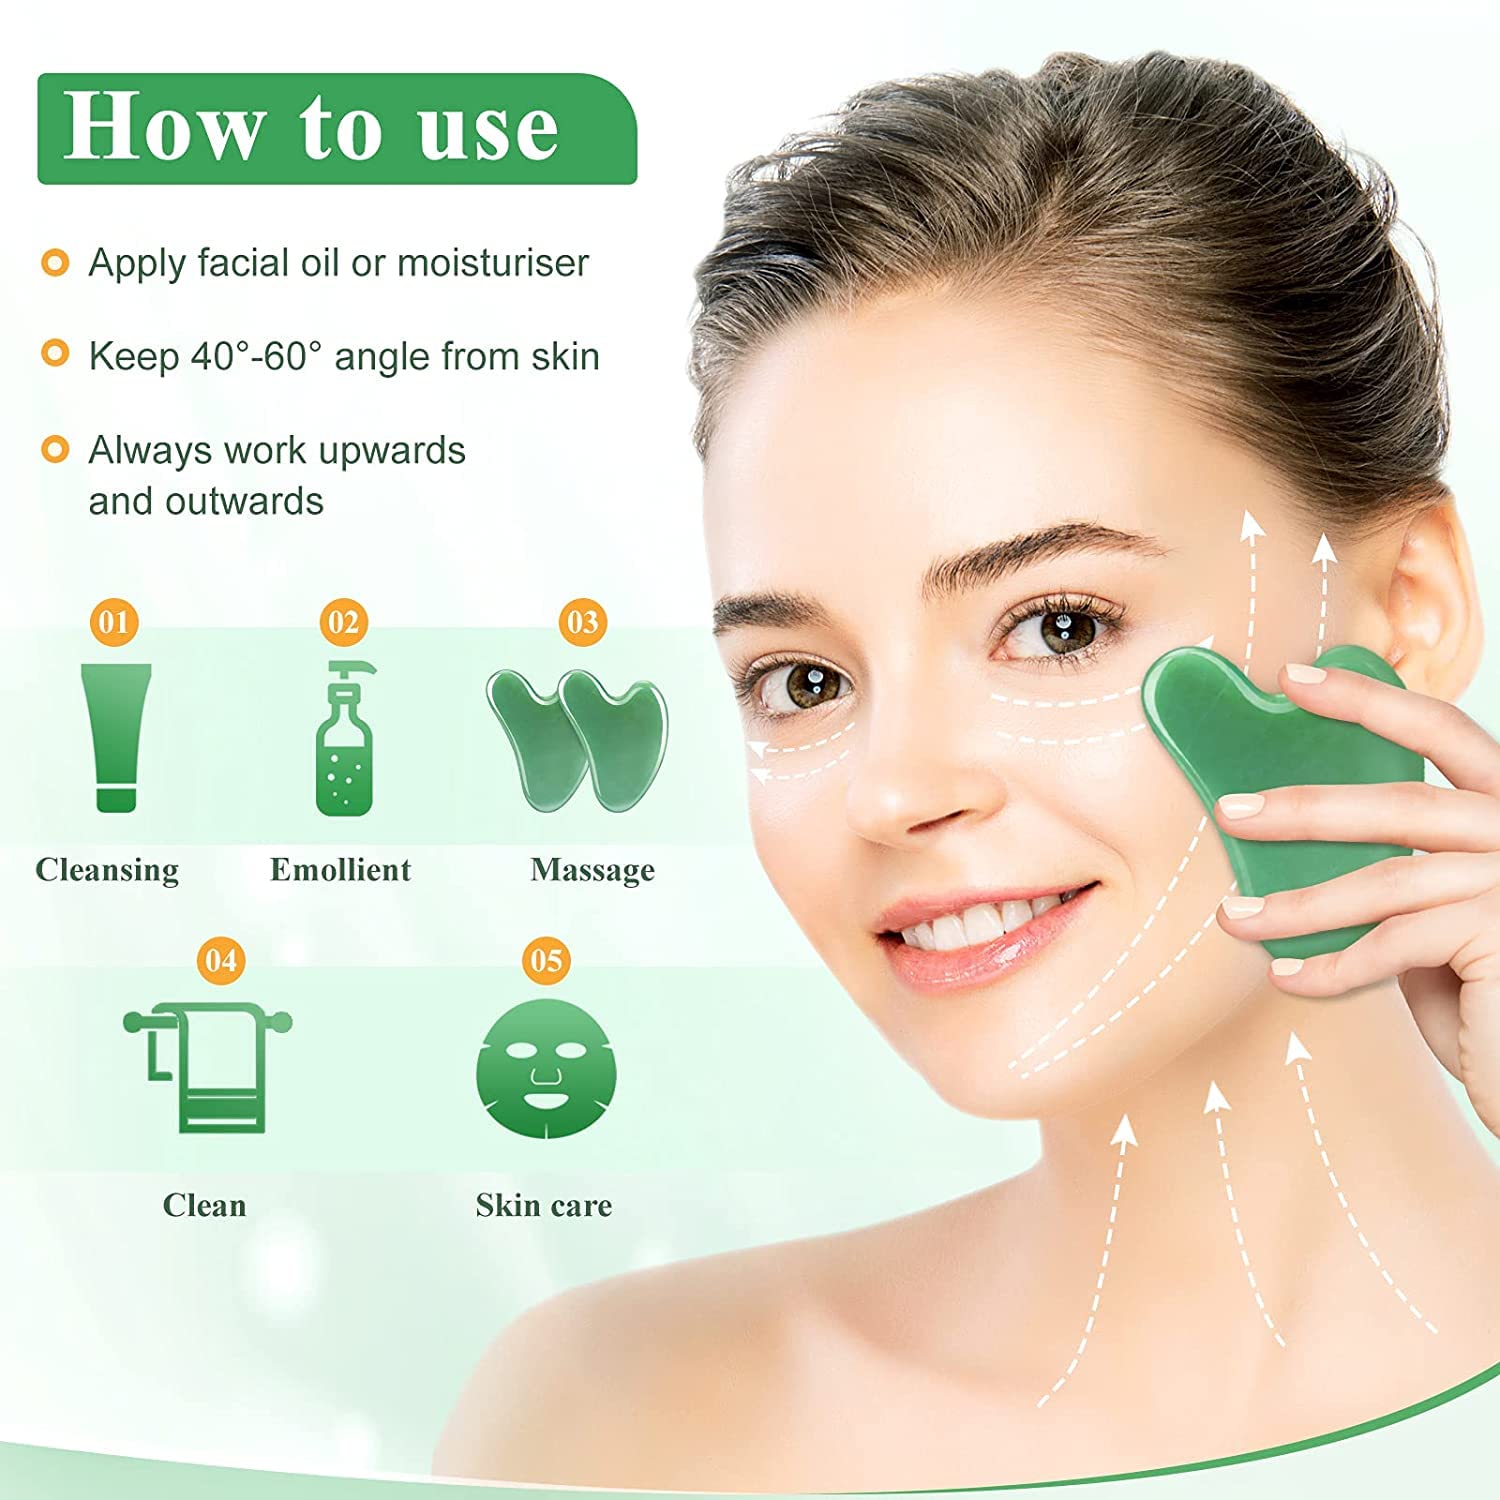 Gua Sha Facial Tools, Jade Gua Sha Stones Massage Scraping for Physical Therapy and SPA Acupuncture Therapy Used for Face, Eyes, Neck and Body (Green 2 Pcs)